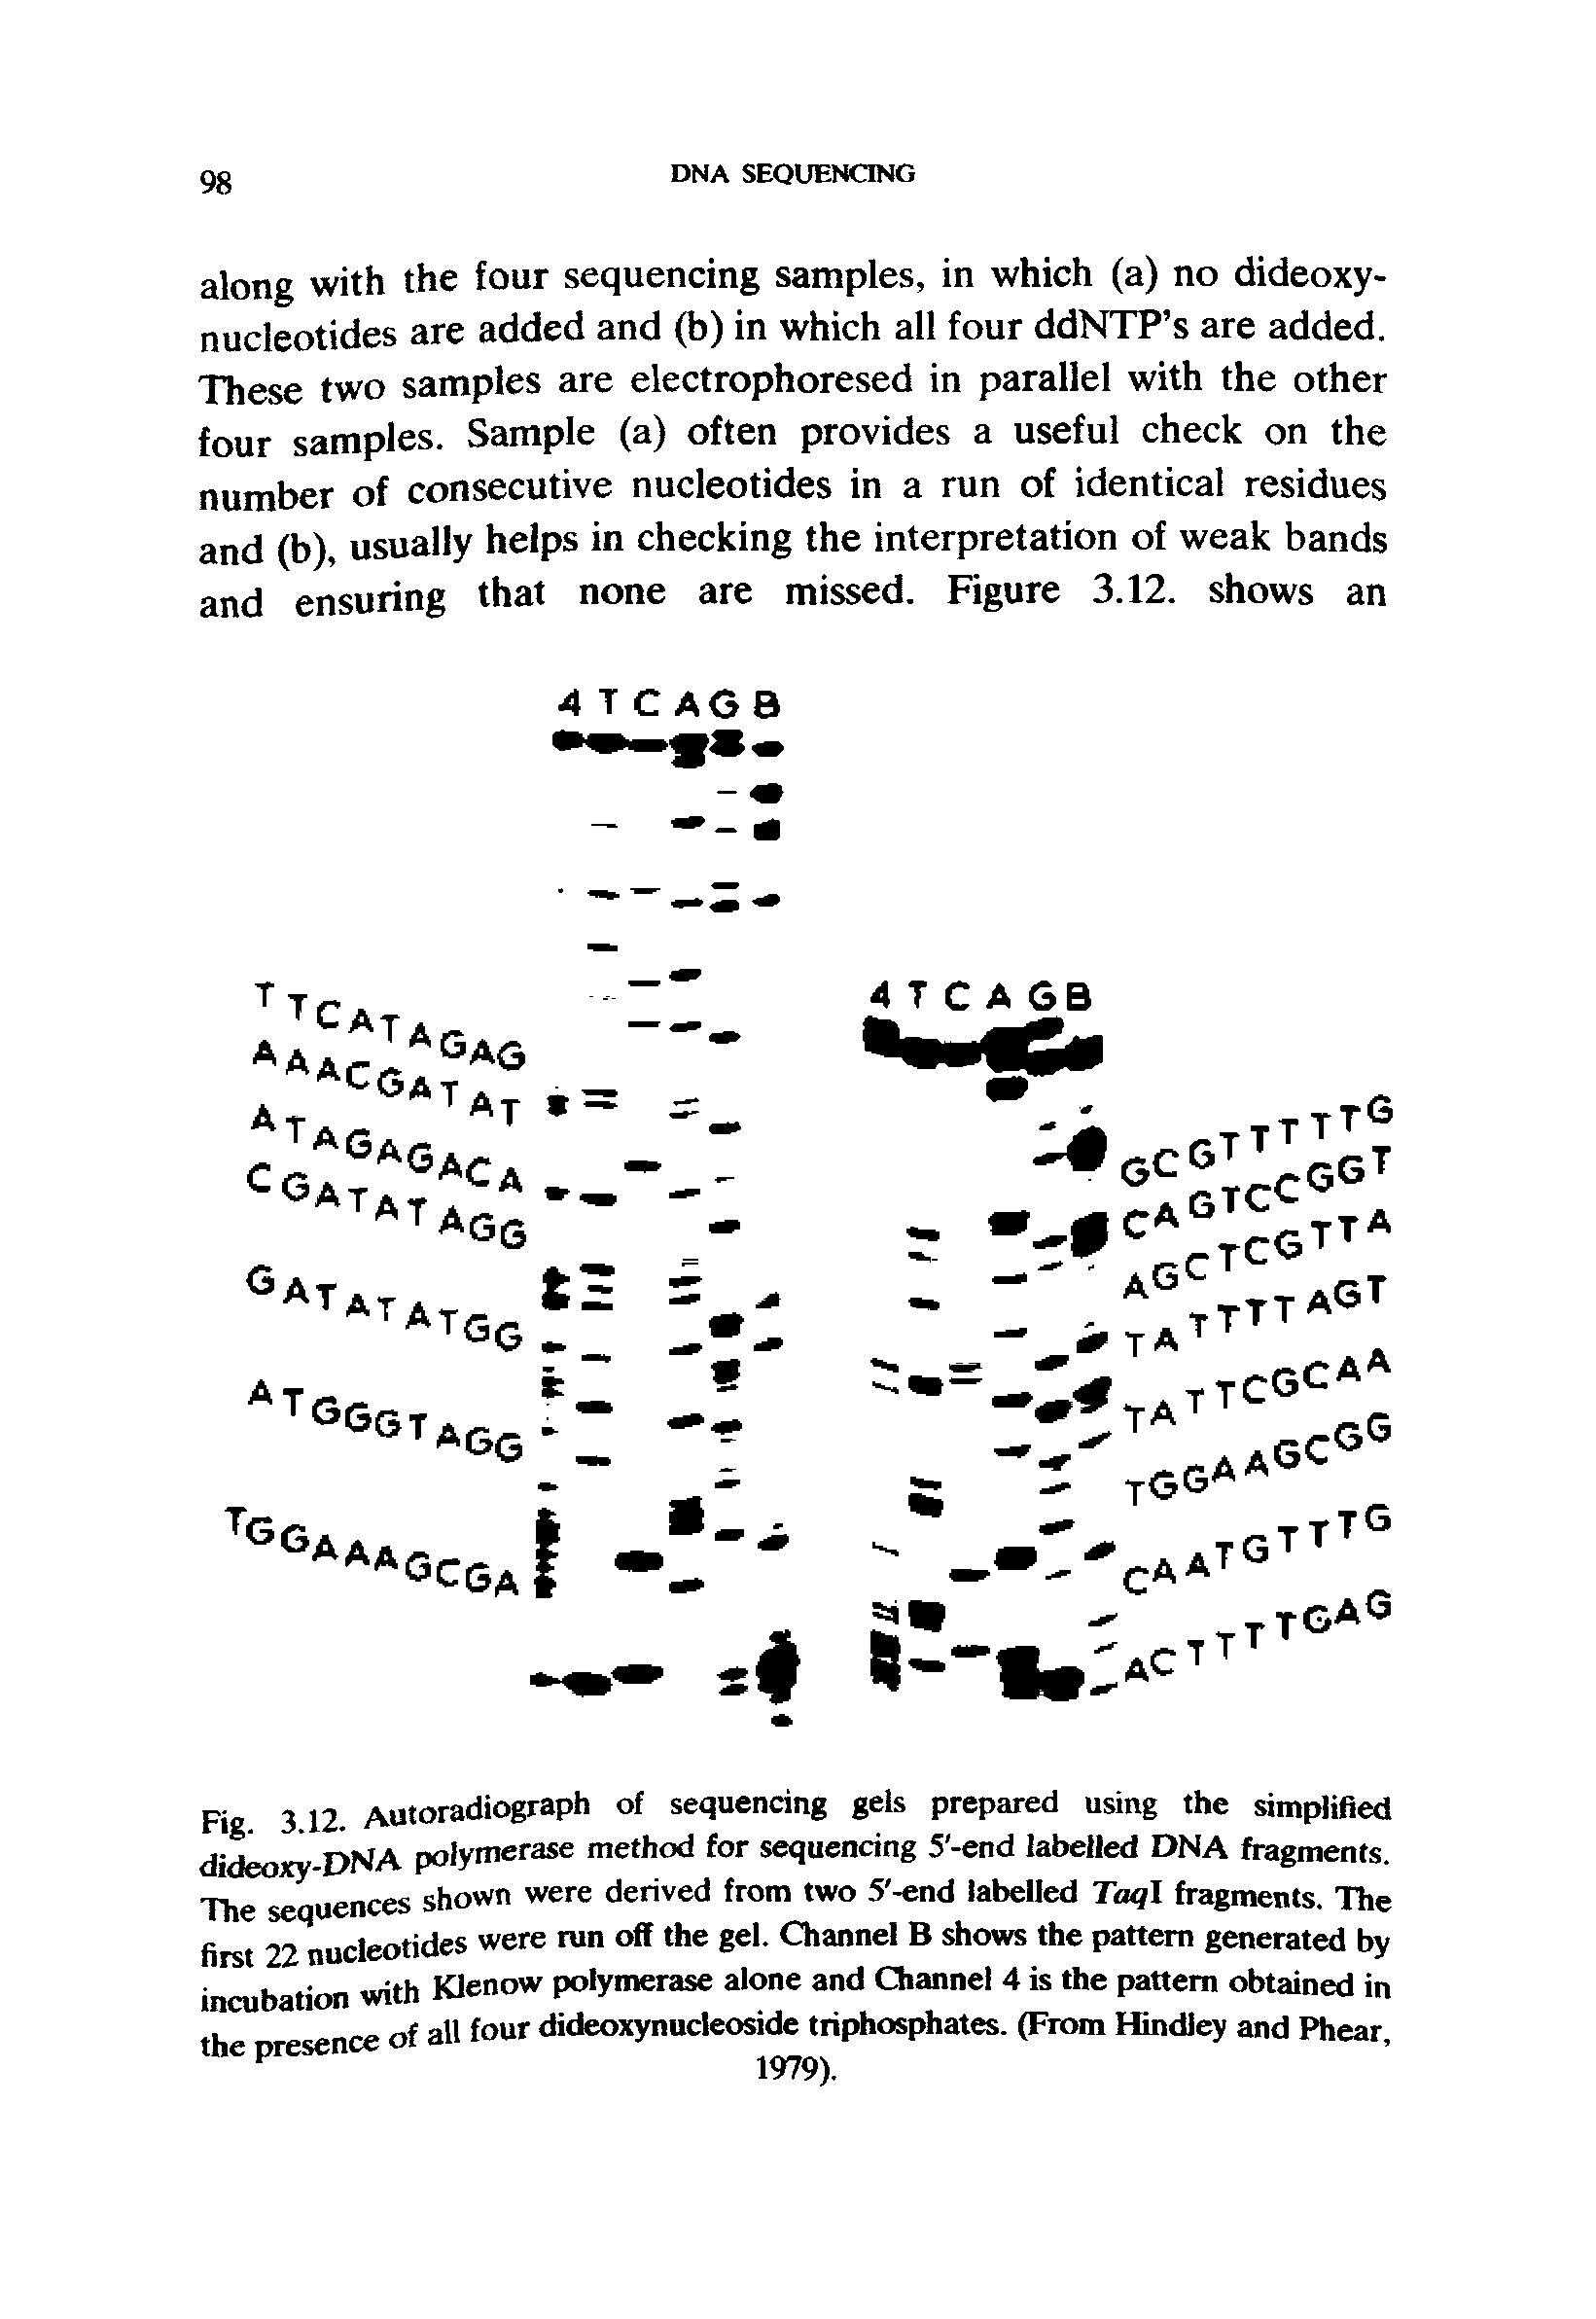 Fig. 3.12. Autoradiograph of sequencing gels prepared using, he sim dideoxy-DNA polymerase method for sequencing 5 -end labelled DNA r T The sequences shown were derived from two 5 -end labelled T r agments first 22 nucleotides were run off the gel. Channel B shows the olT 1 The incubation with Klenow polymerase alone and Channel 4 is the natte 8 "erated bV the presence of all four dideoxynucleoside triphosphates. (From Hindfoy an T...